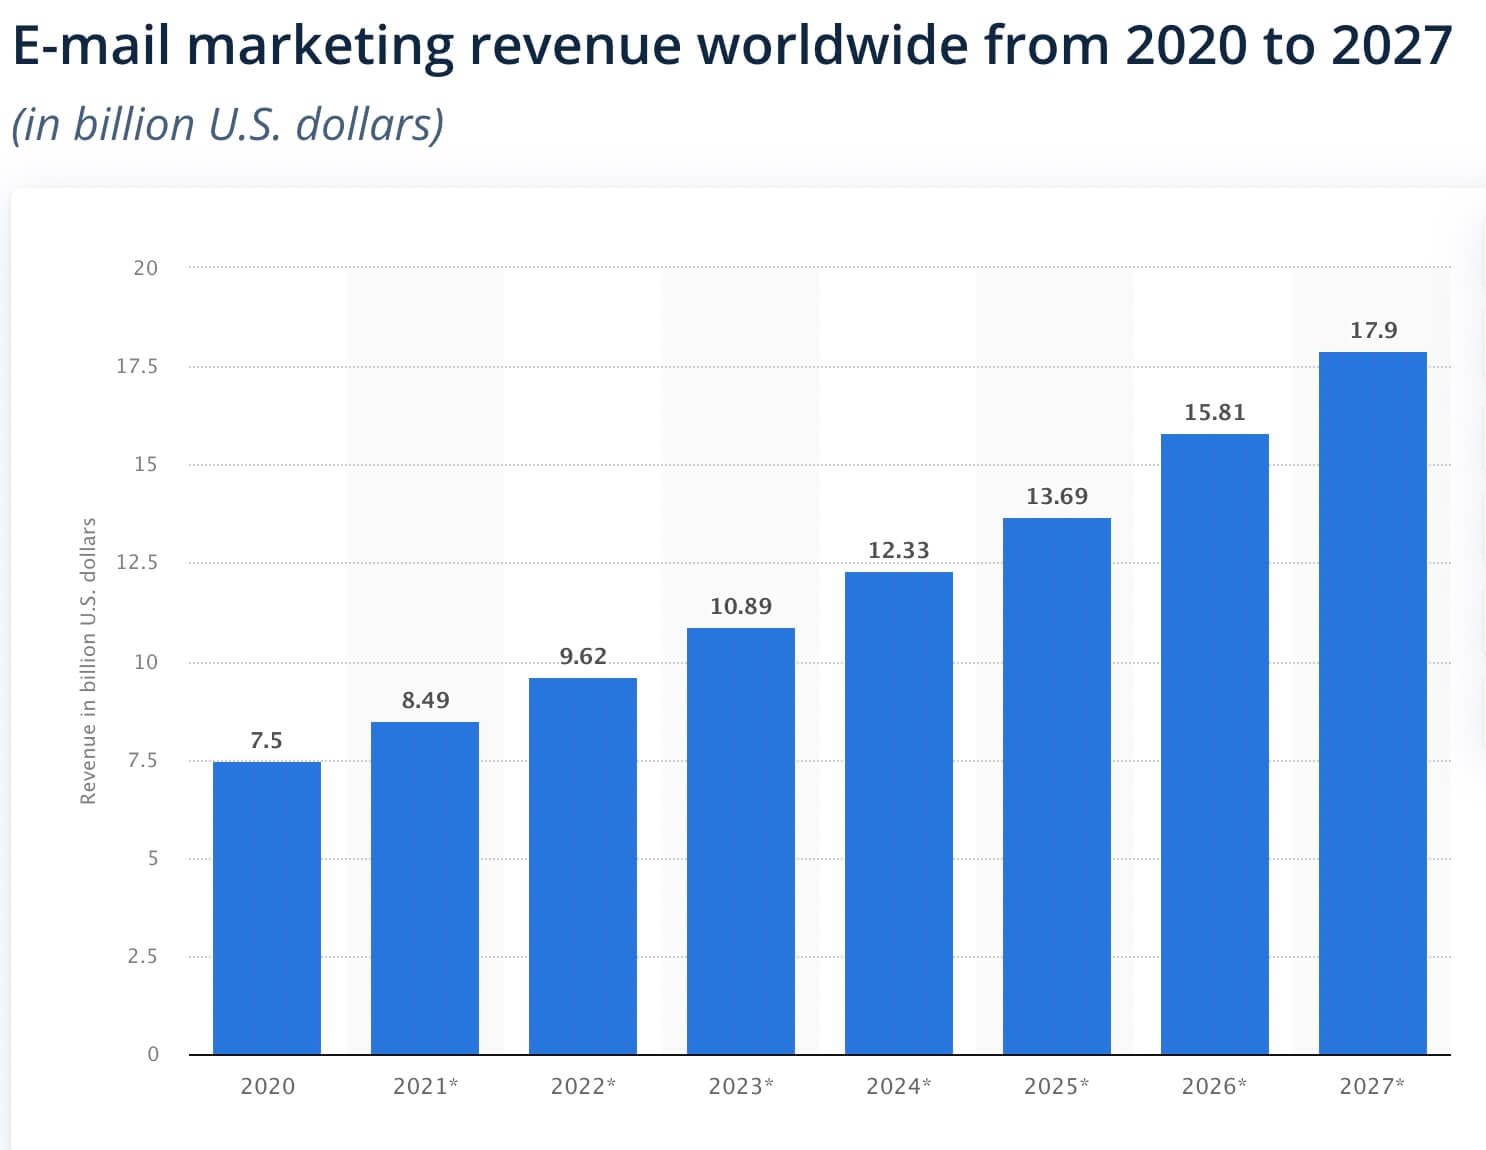 Email marketing revenue predictions in billions: 8.49 for 2021, 9.62 for 2022, 10.89 for 2023, 12.33 for 2024, 13.69 for 2025, 15.81 for 2026.